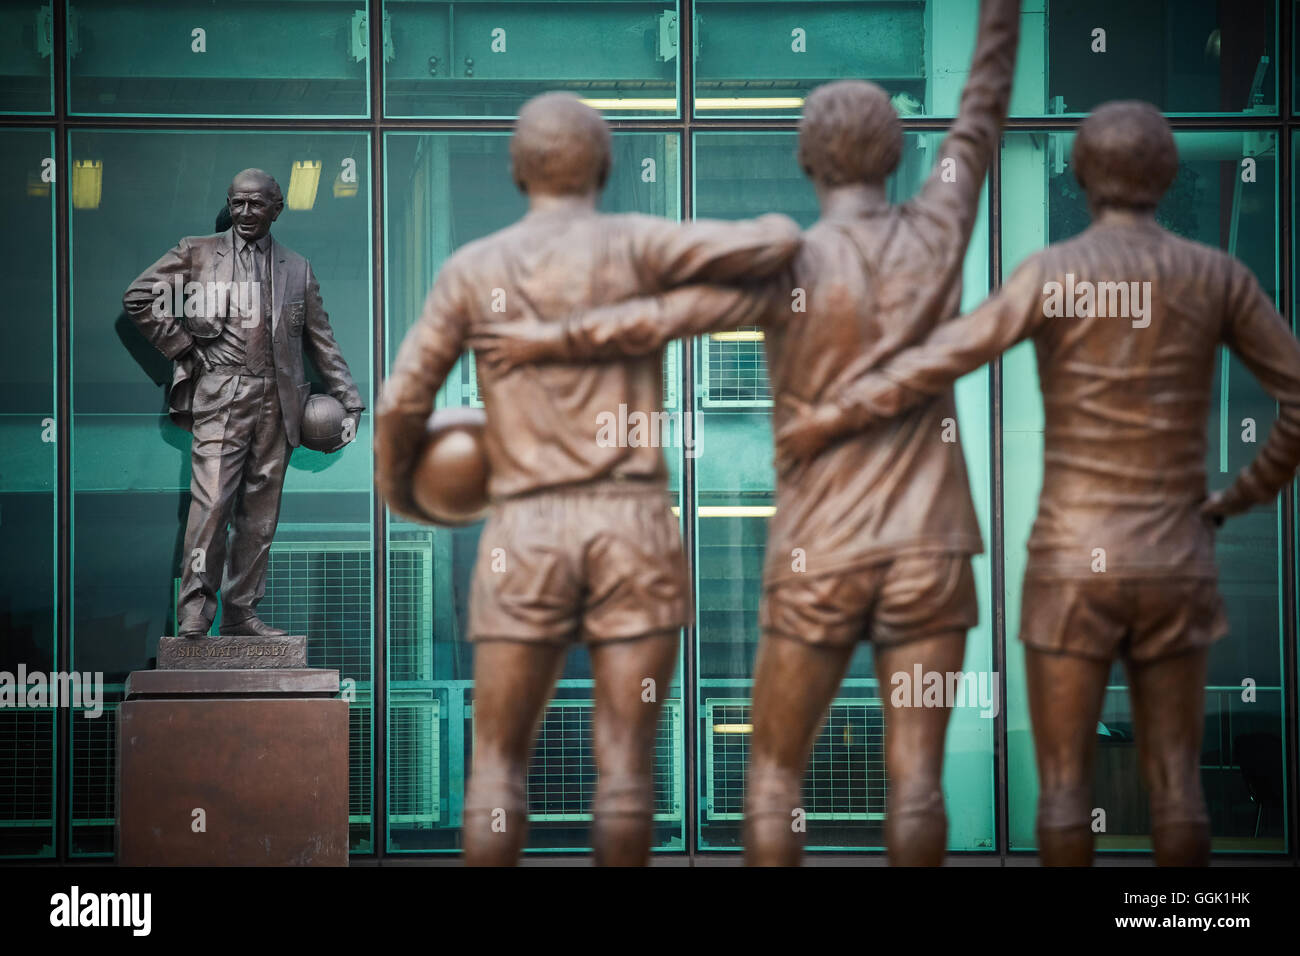 Manchester united  Holy Trinity Matt Busby statue   Artist creative designer designed created hand craft crafted made by sculpte Stock Photo